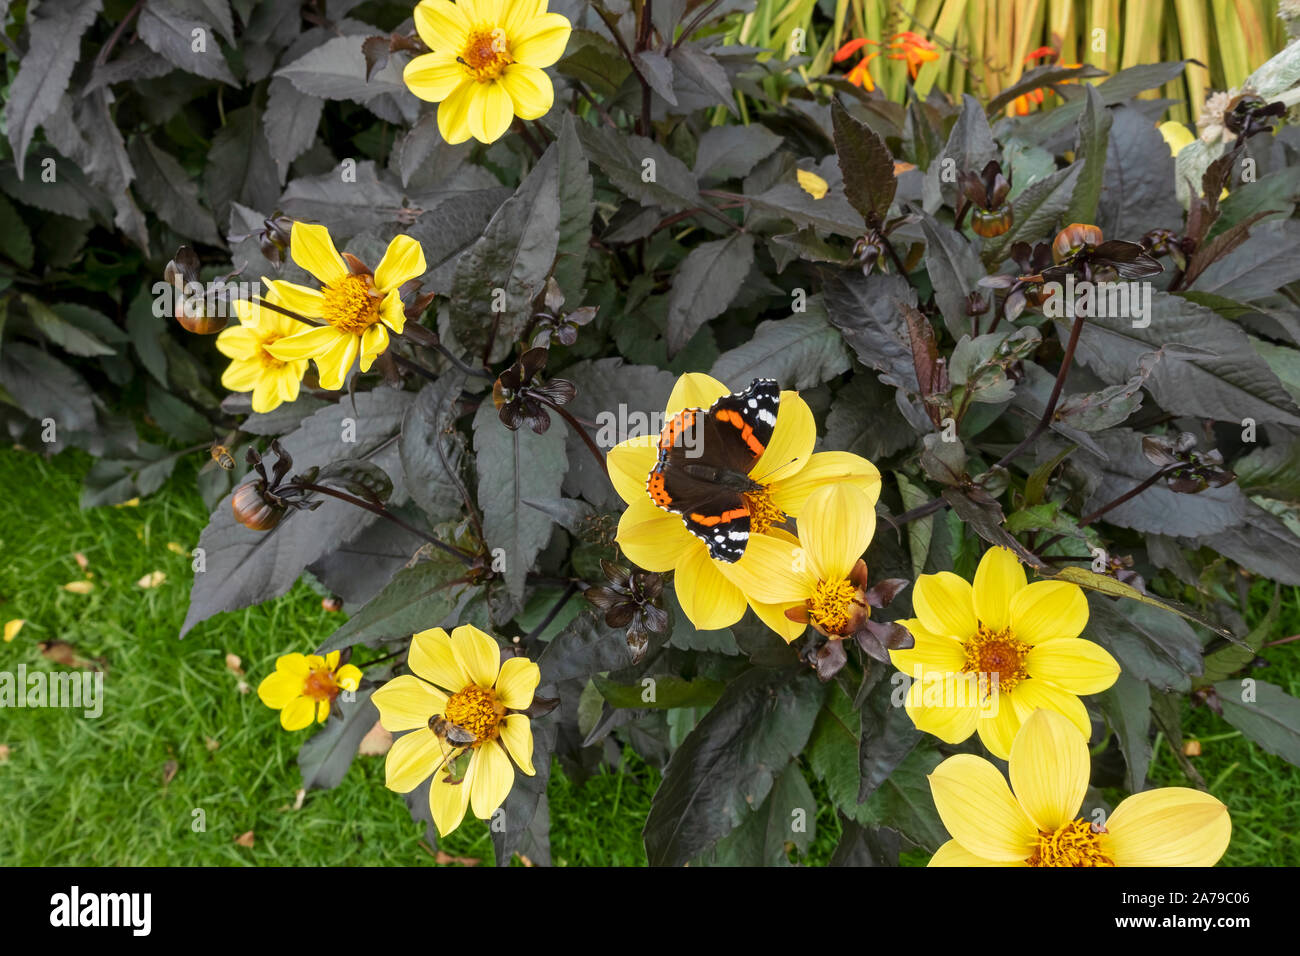 Red admiral butterfly on yellow dahlia dahlias flower flowering plant flowers in summer garden England UK United Kingdom GB Great Britain Stock Photo